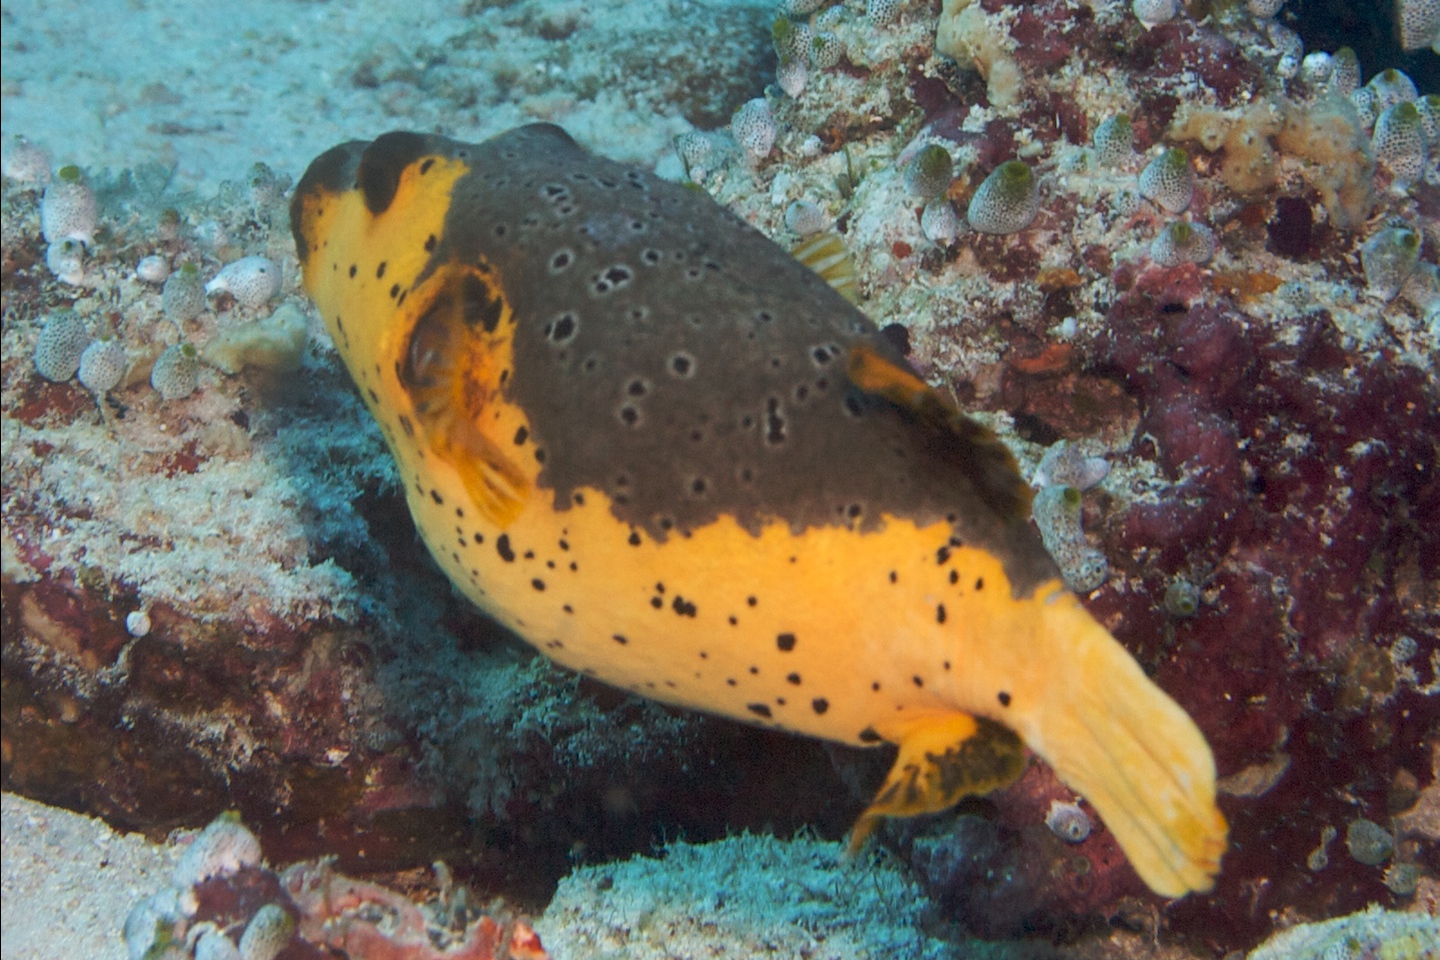 Black-spotted puffer